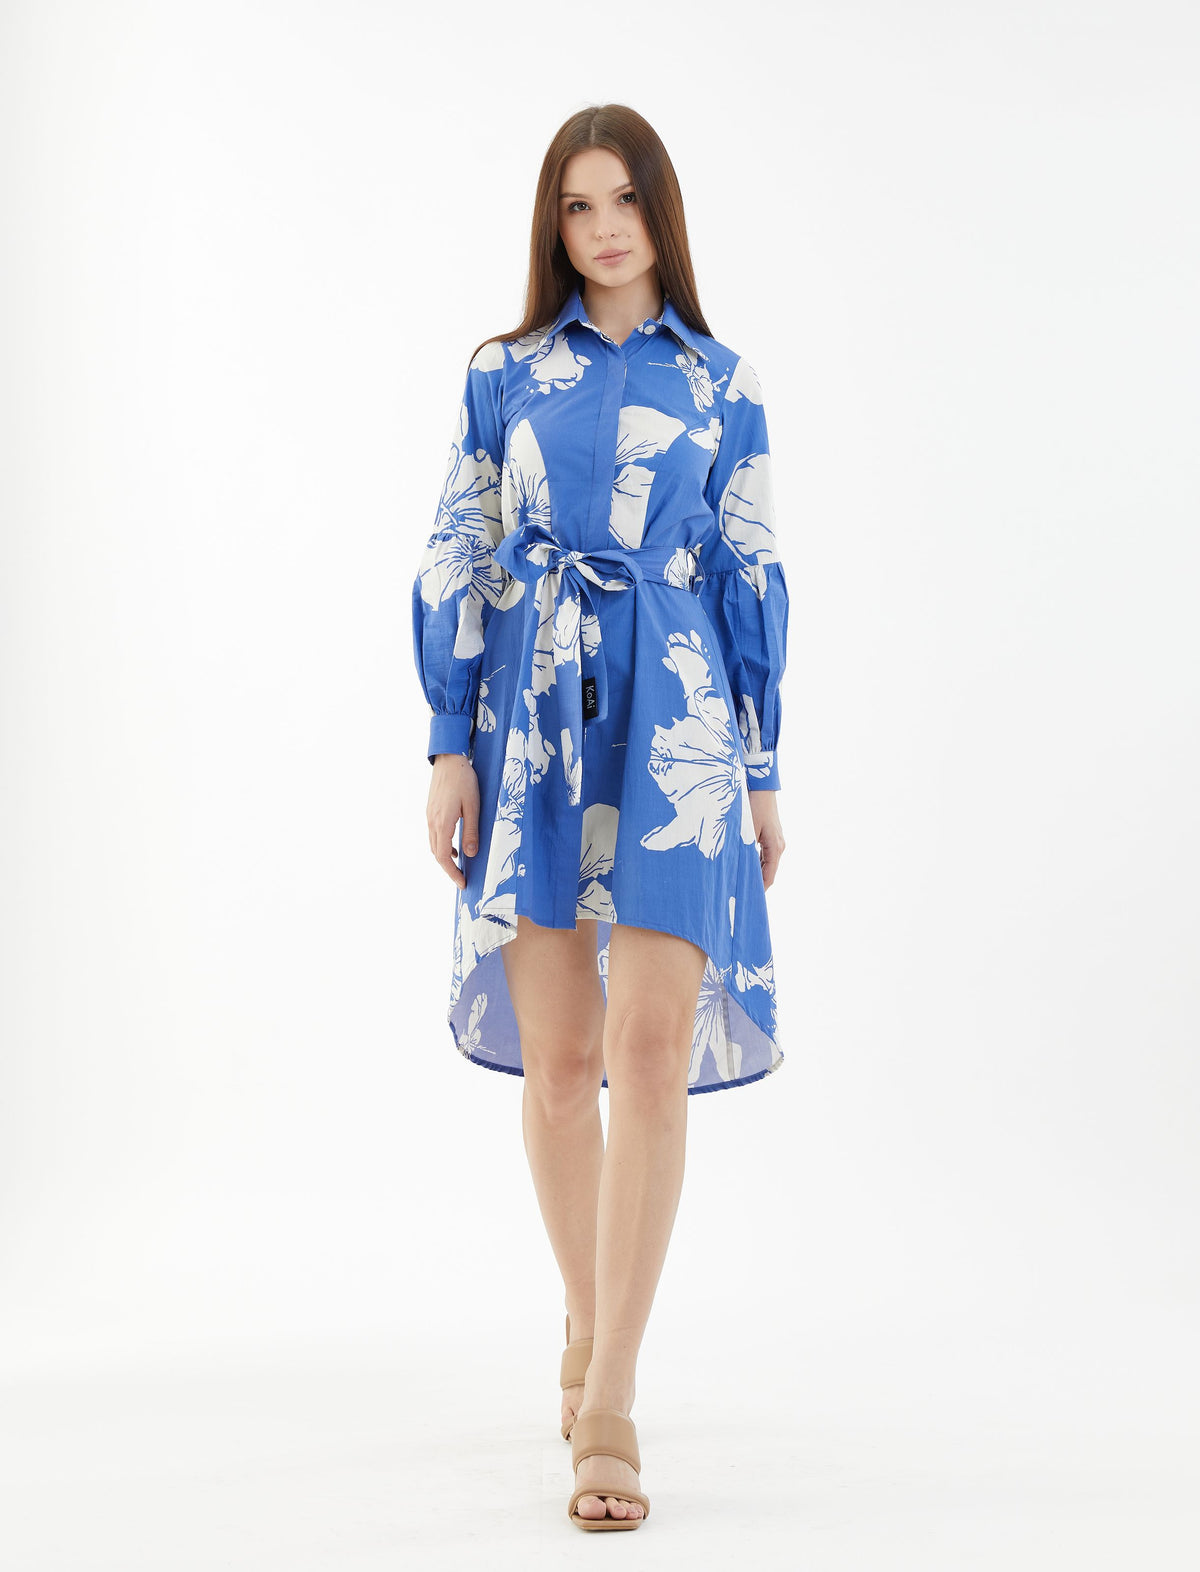 BLUE AND WHITE FLORAL SHIRT DRESS